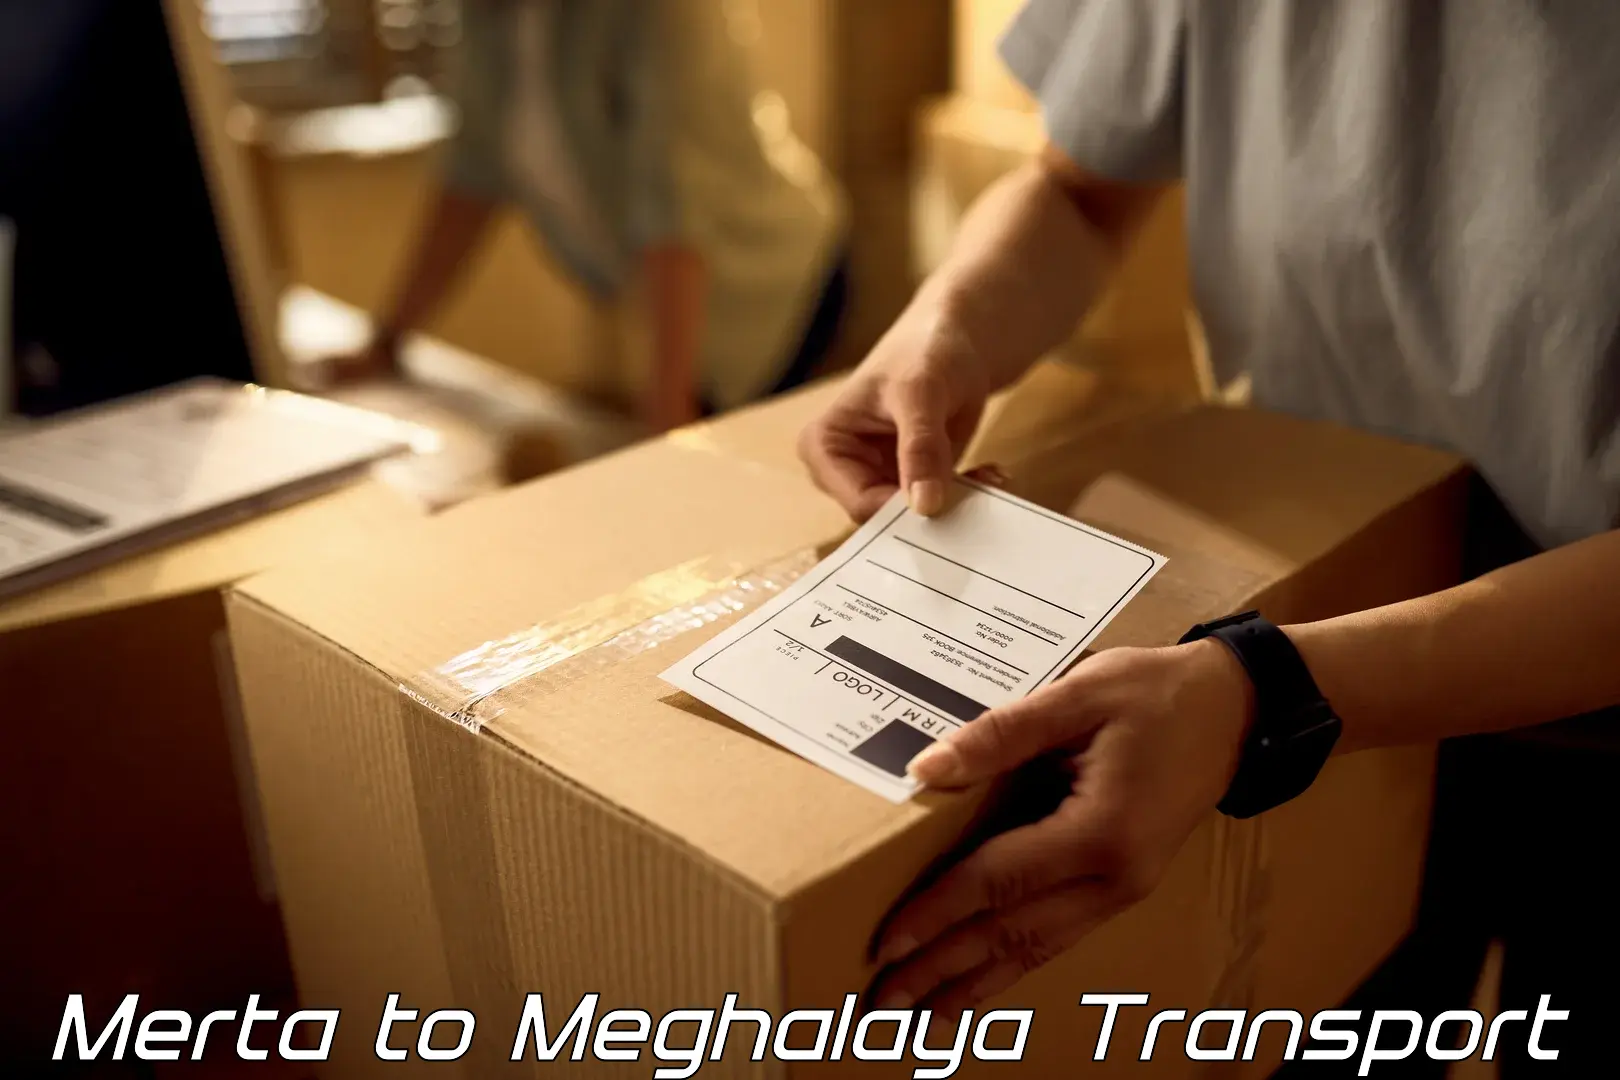 Container transport service Merta to Meghalaya